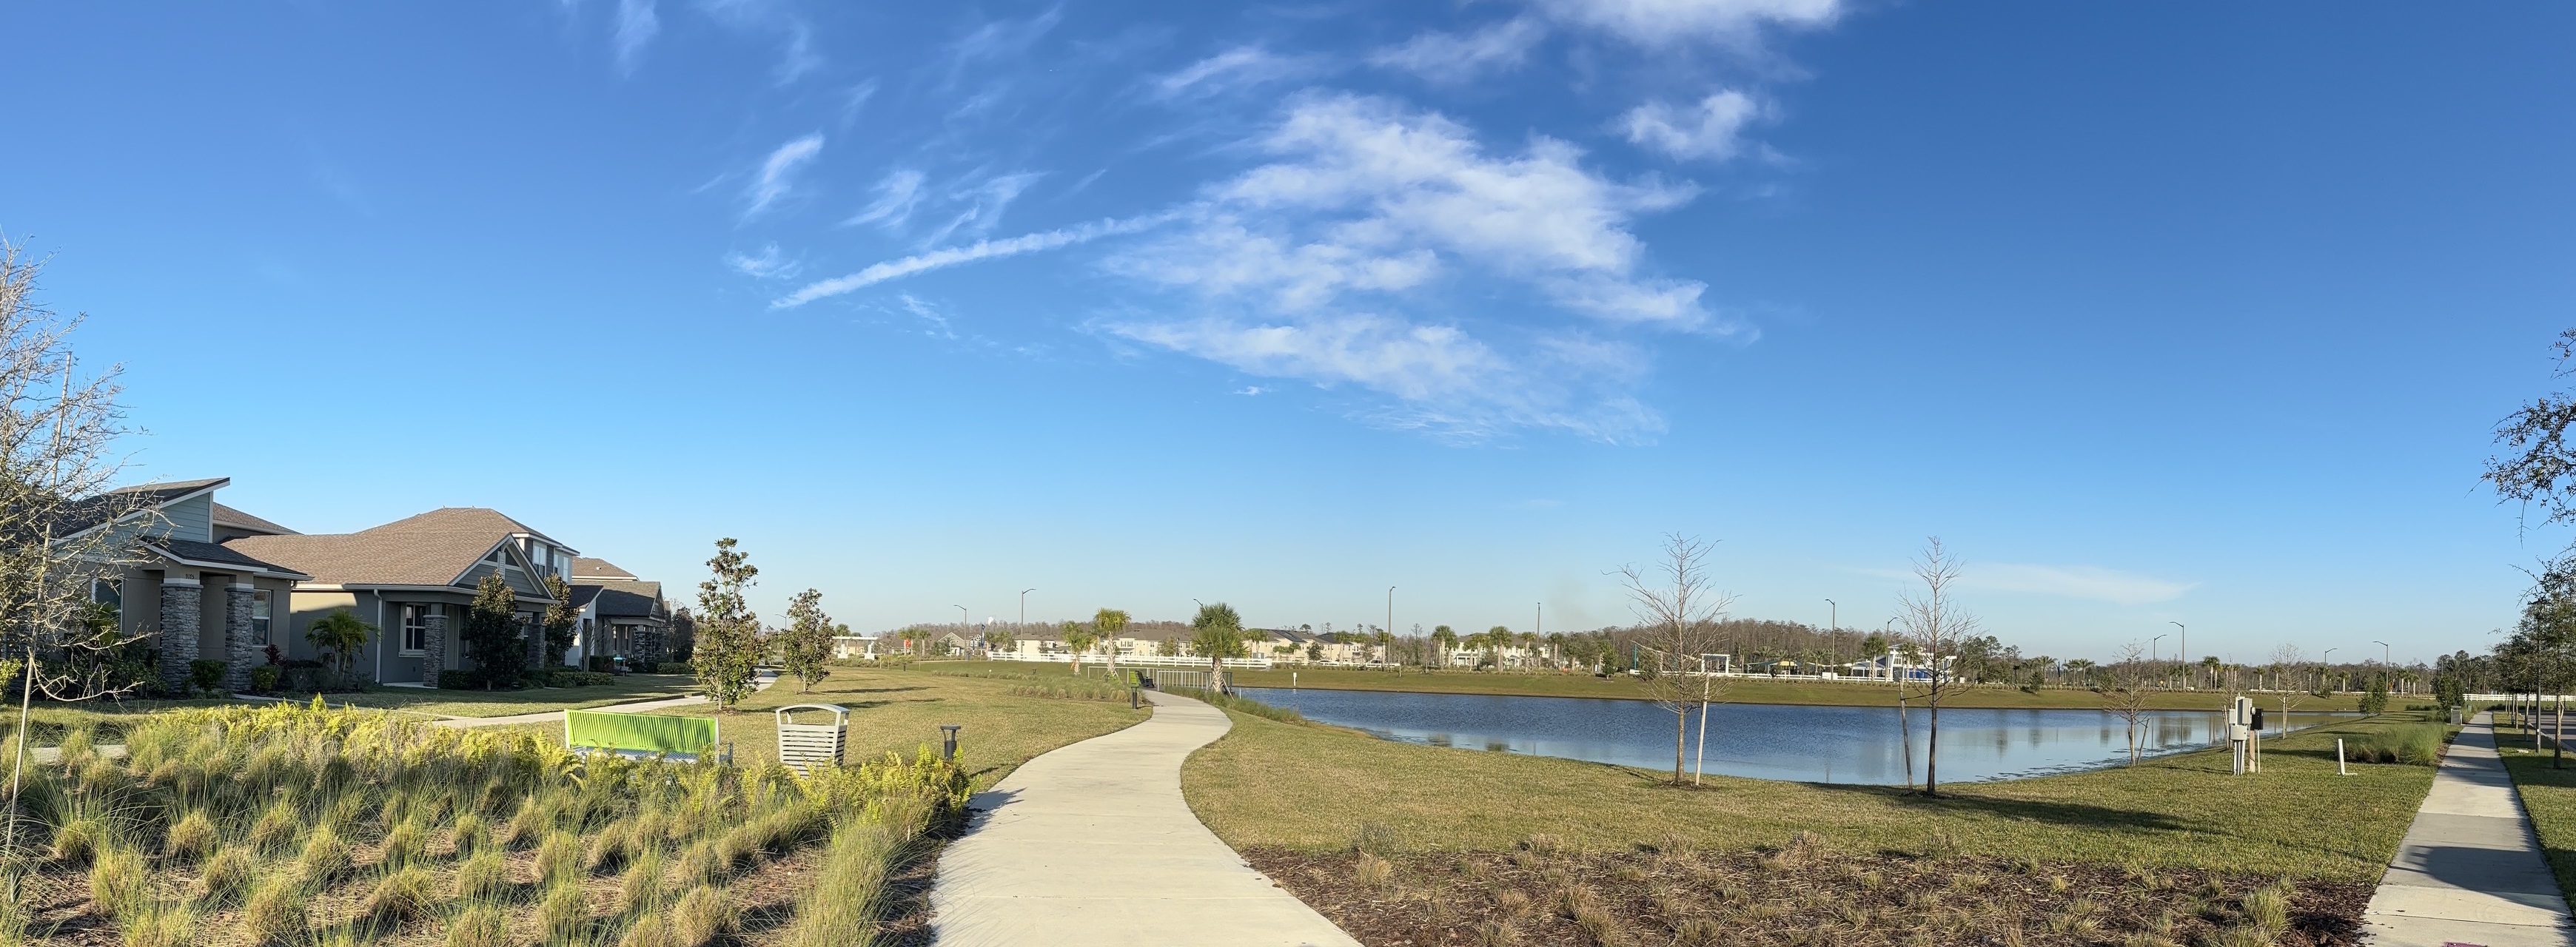 Meridian Parks Current View 3